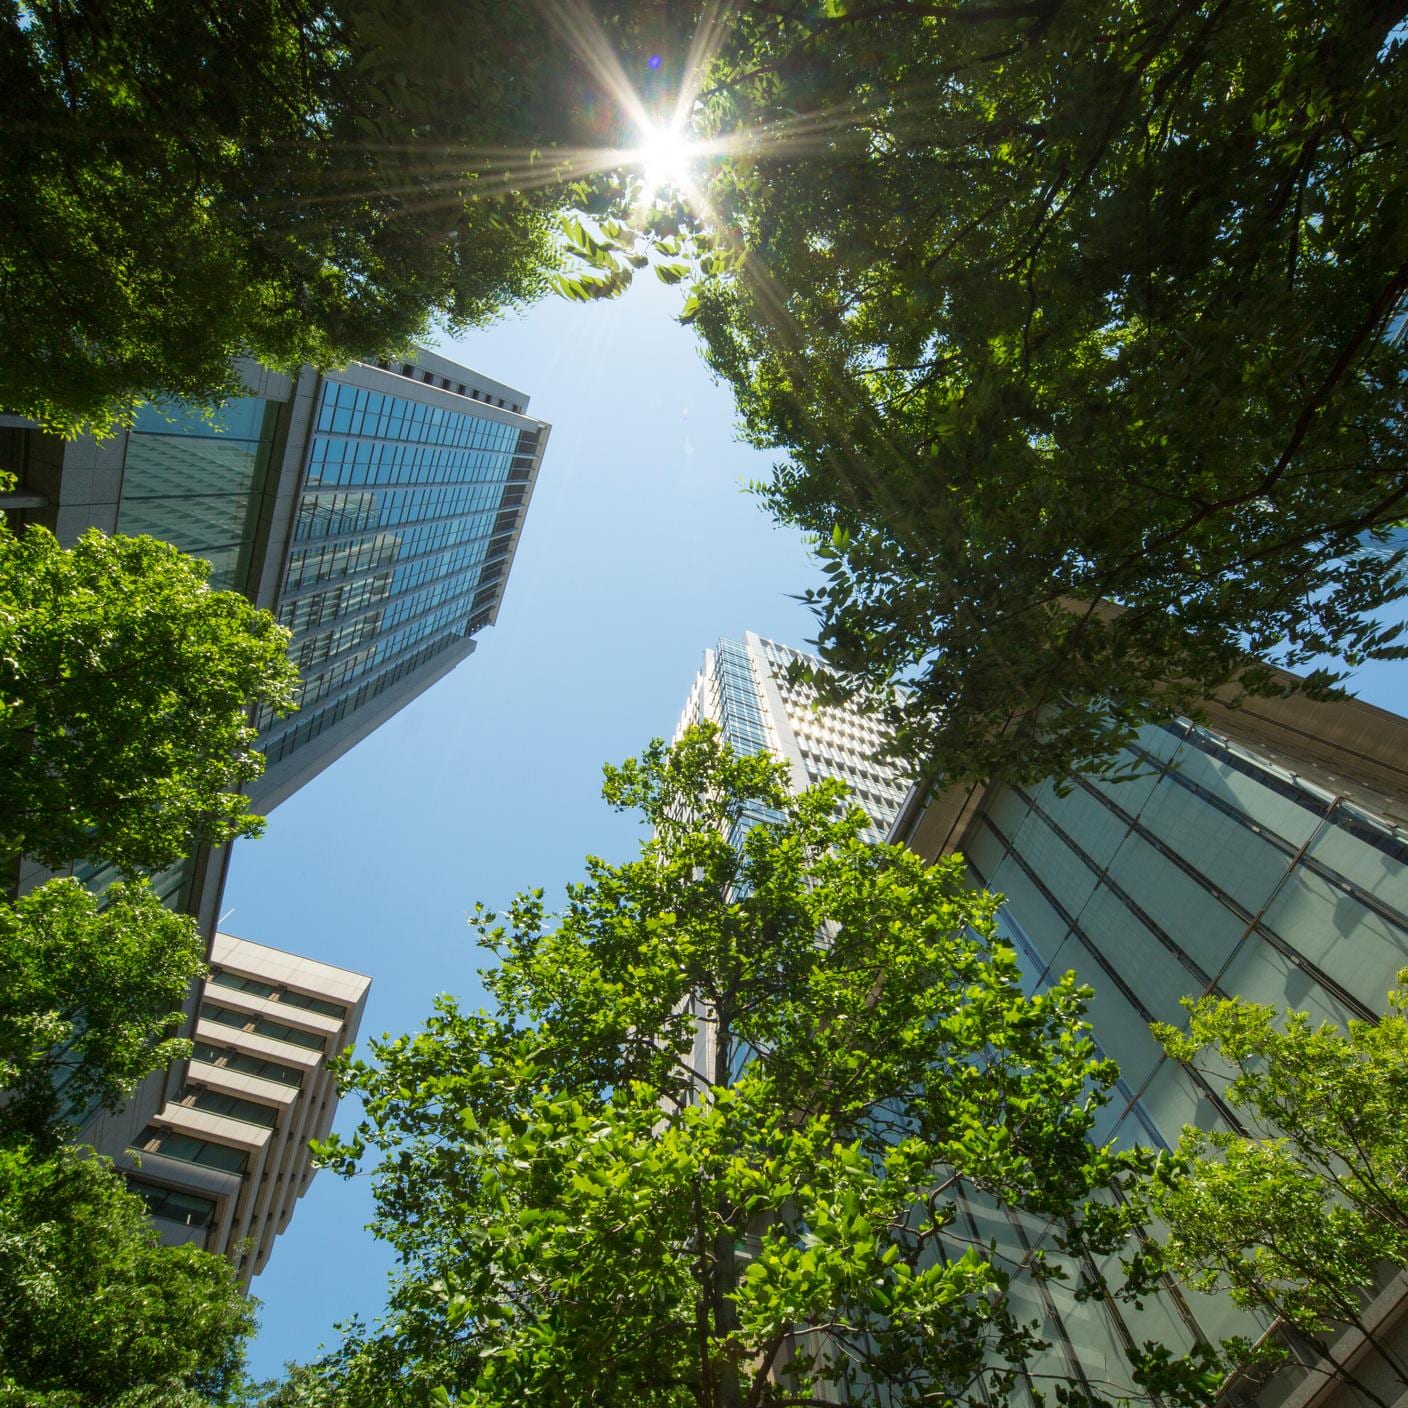 Digital Trust in the Built Environment - Urban green, low angle view of buildings with greenery